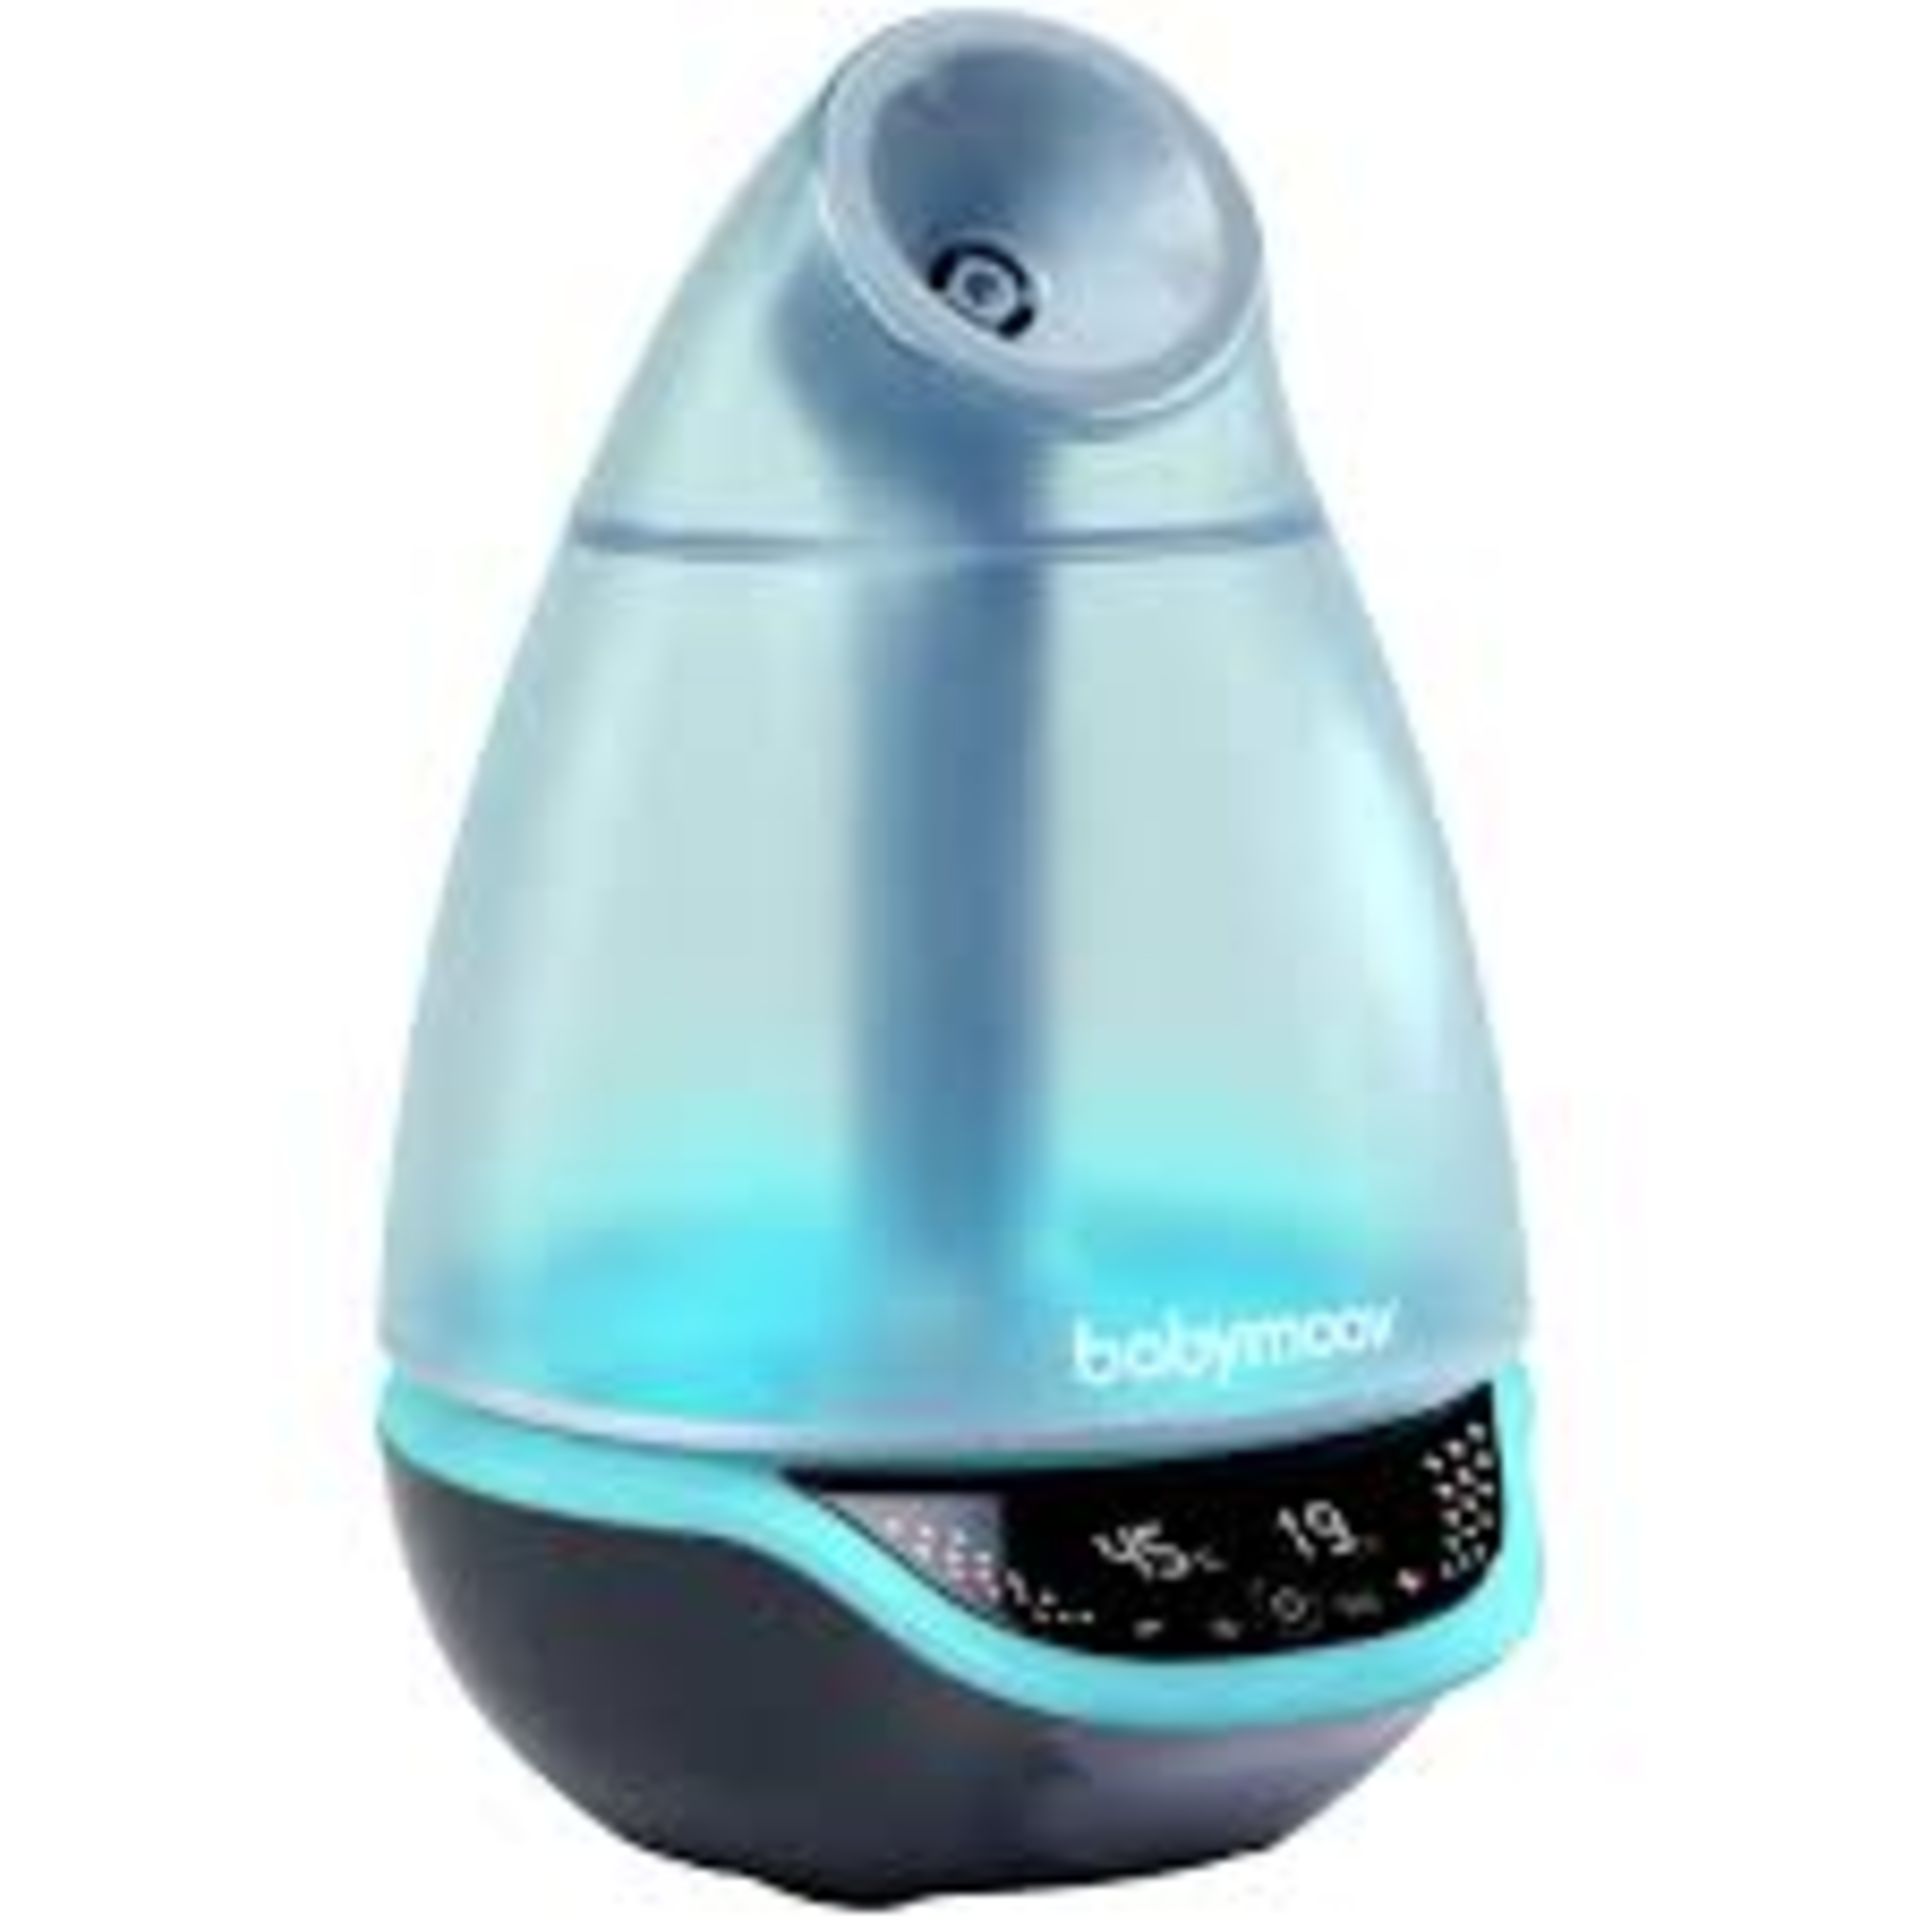 Boxed Babymoov Humidifier RRP £80 (4170174) (Public Viewing and Appraisals Available)